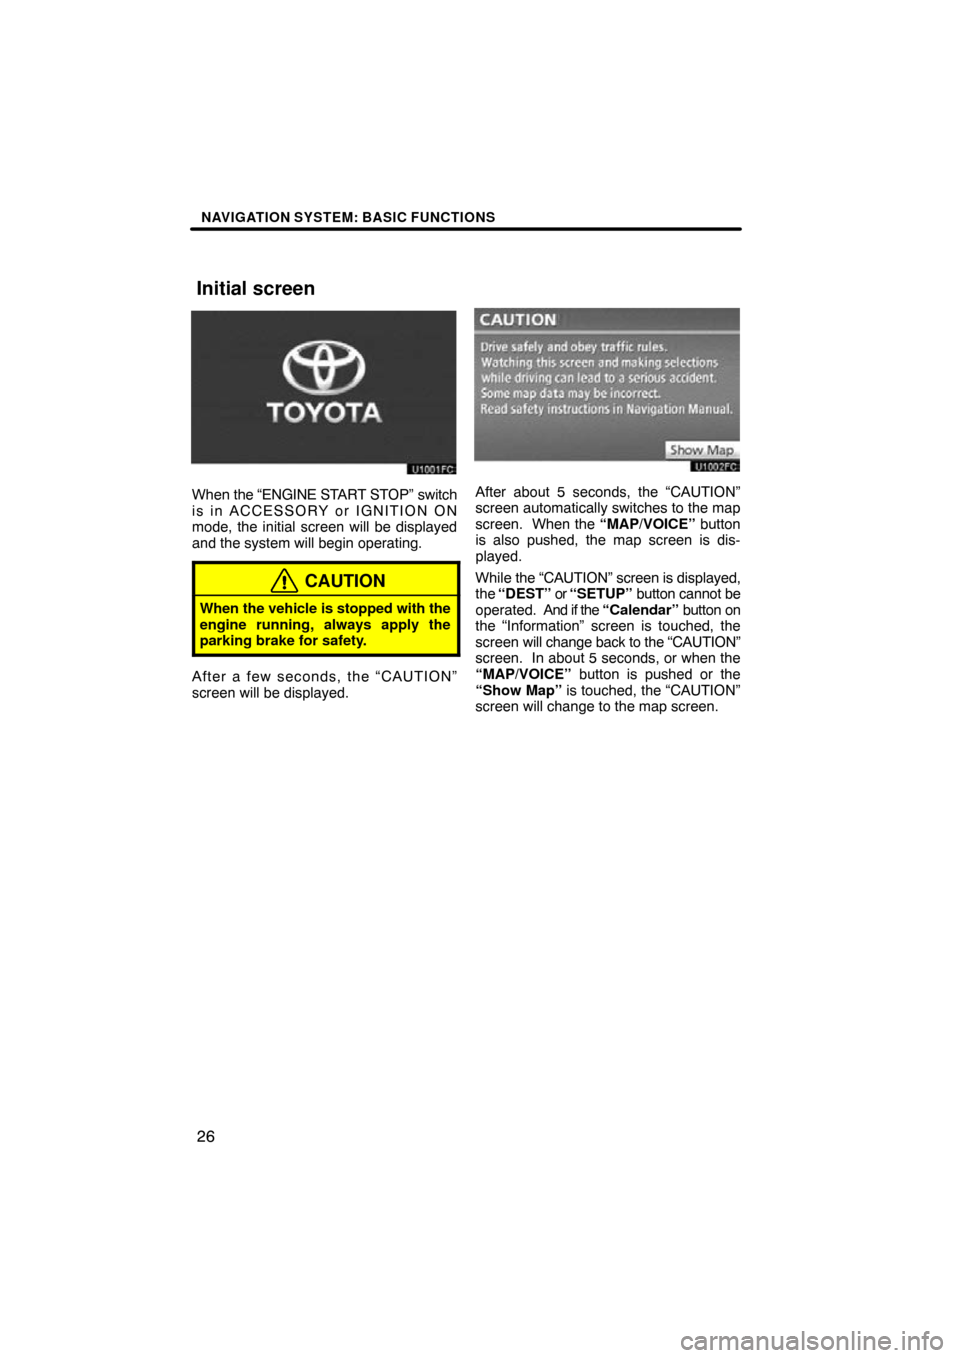 TOYOTA LAND CRUISER 2010 J200 Navigation Manual NAVIGATION SYSTEM: BASIC FUNCTIONS
26
When the “ENGINE START STOP” switch
is in ACCESSORY or IGNITION ON
mode, the initial screen will be displayed
and the system will begin operating.
CAUTION
Whe